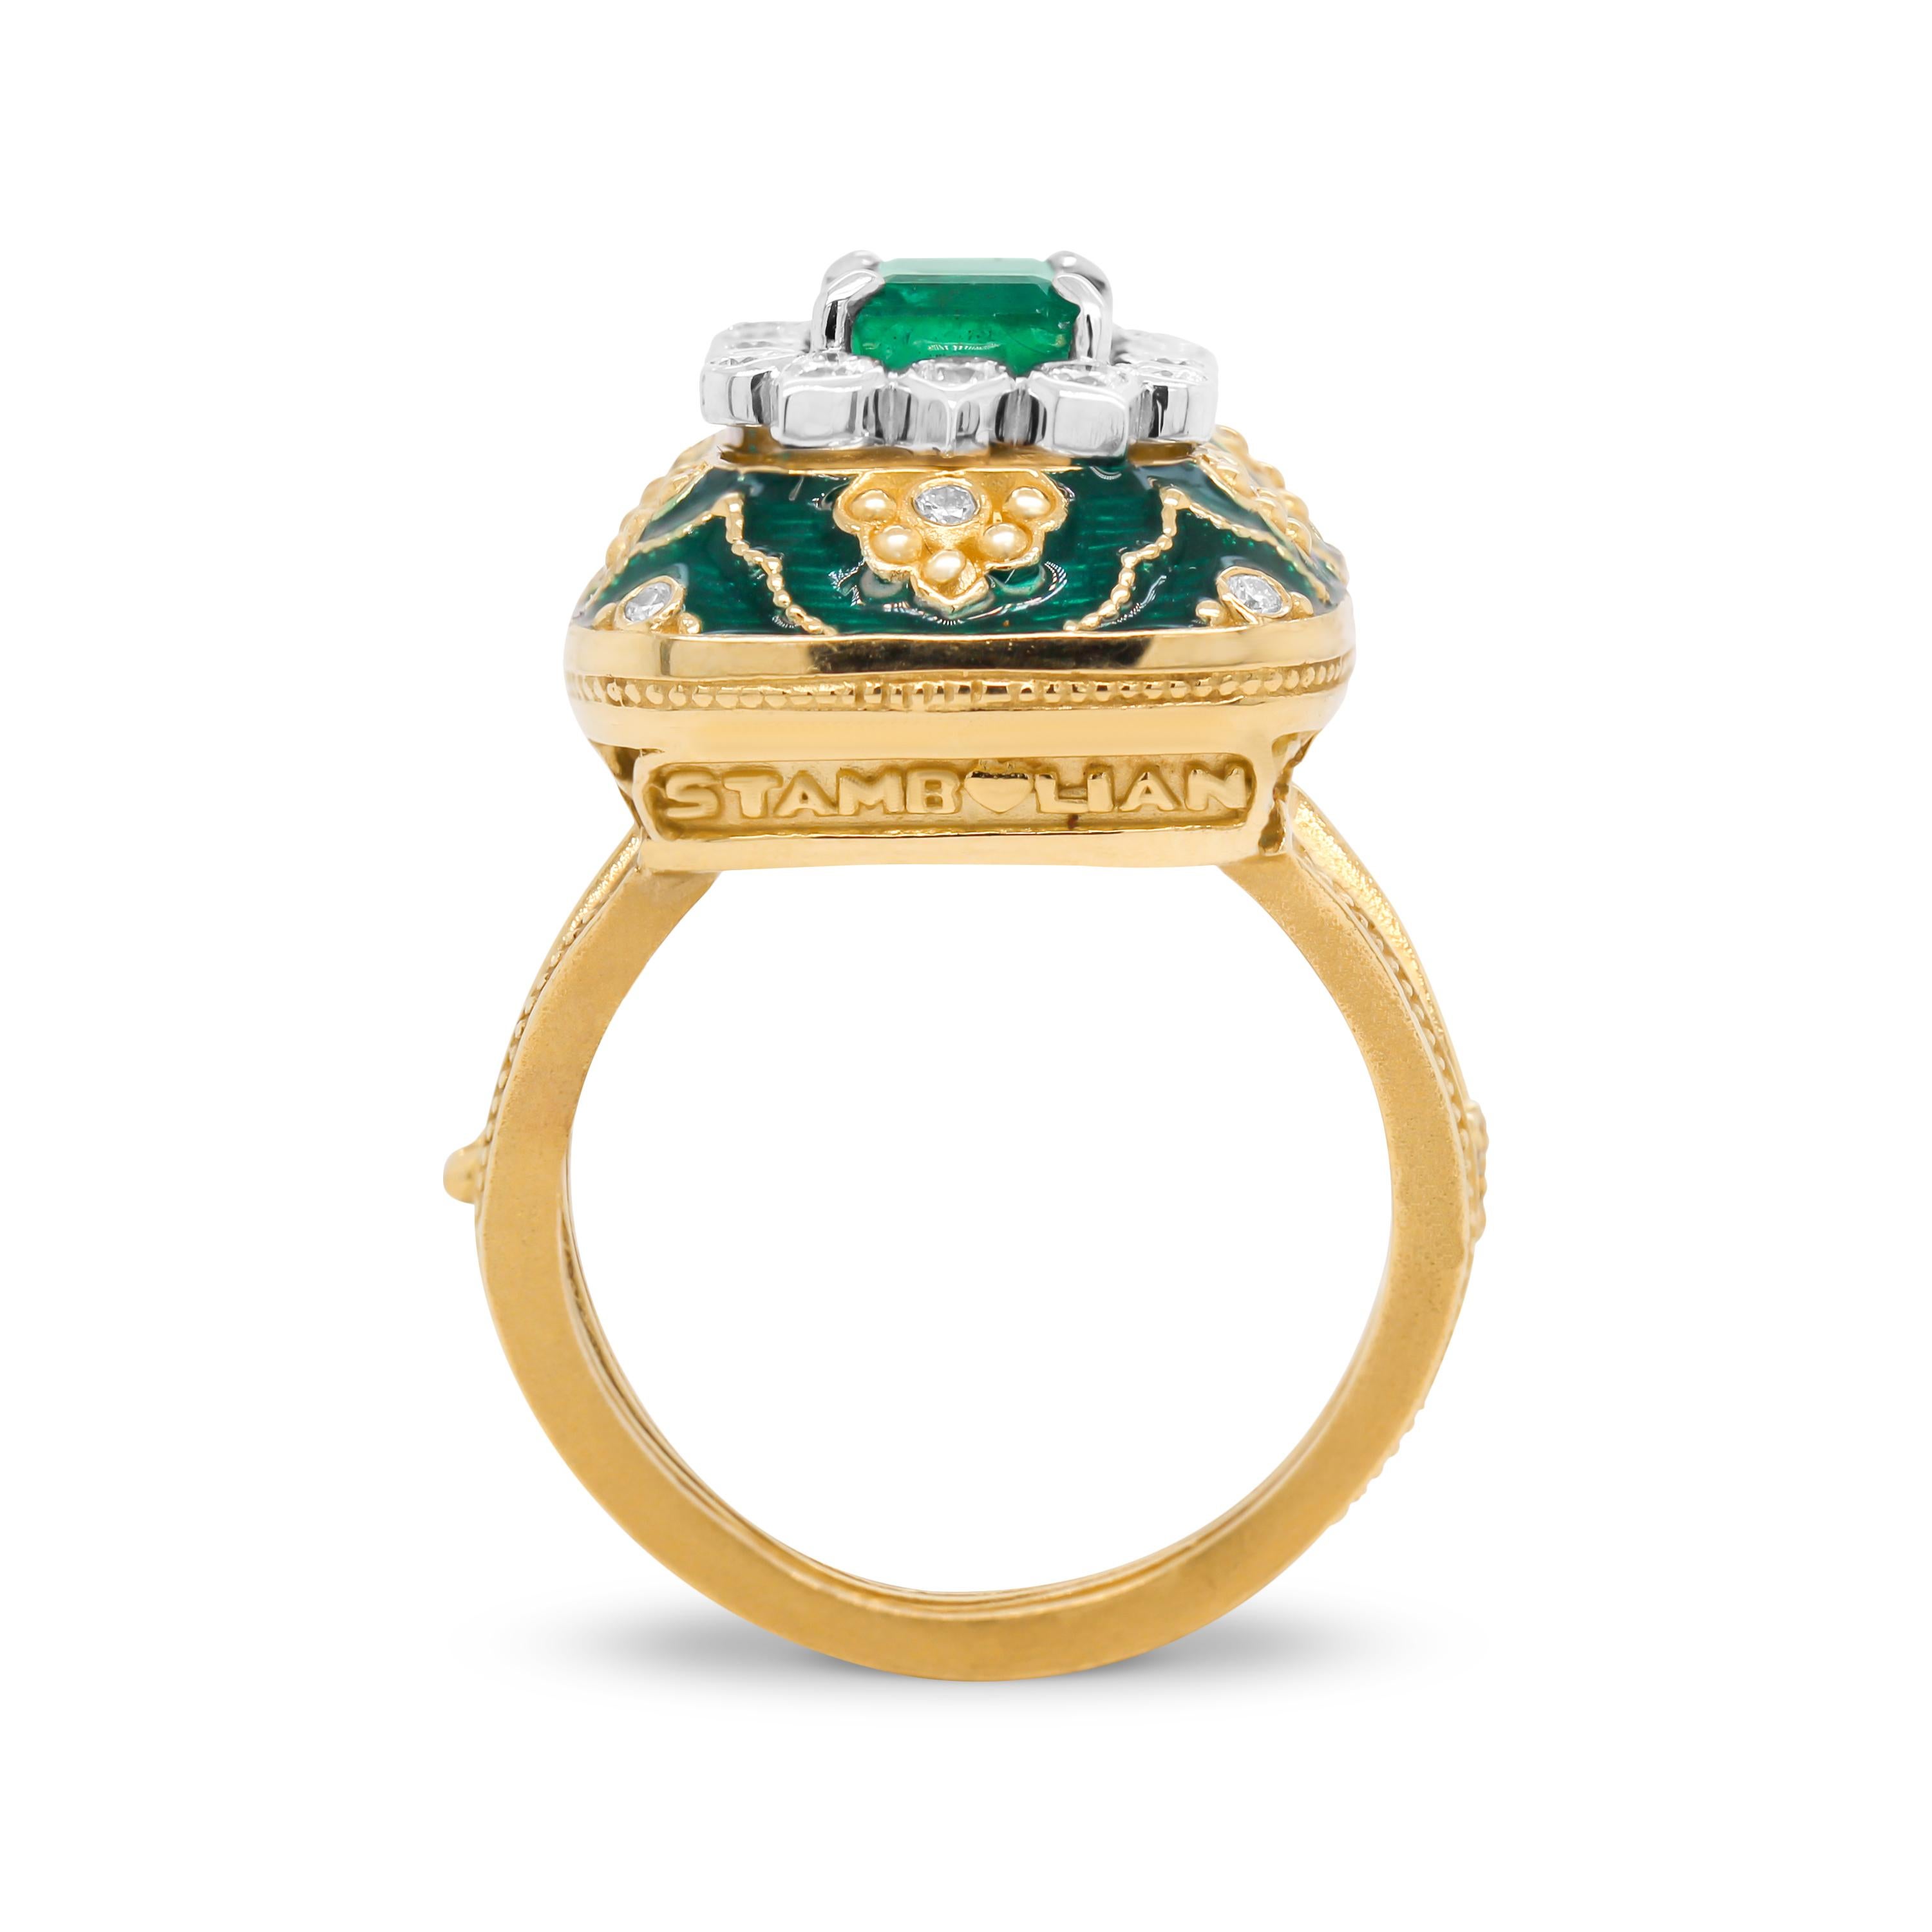 Stambolian 18K Gold and Diamond Emerald Center Green Enamel Cocktail Ring In New Condition For Sale In Boca Raton, FL